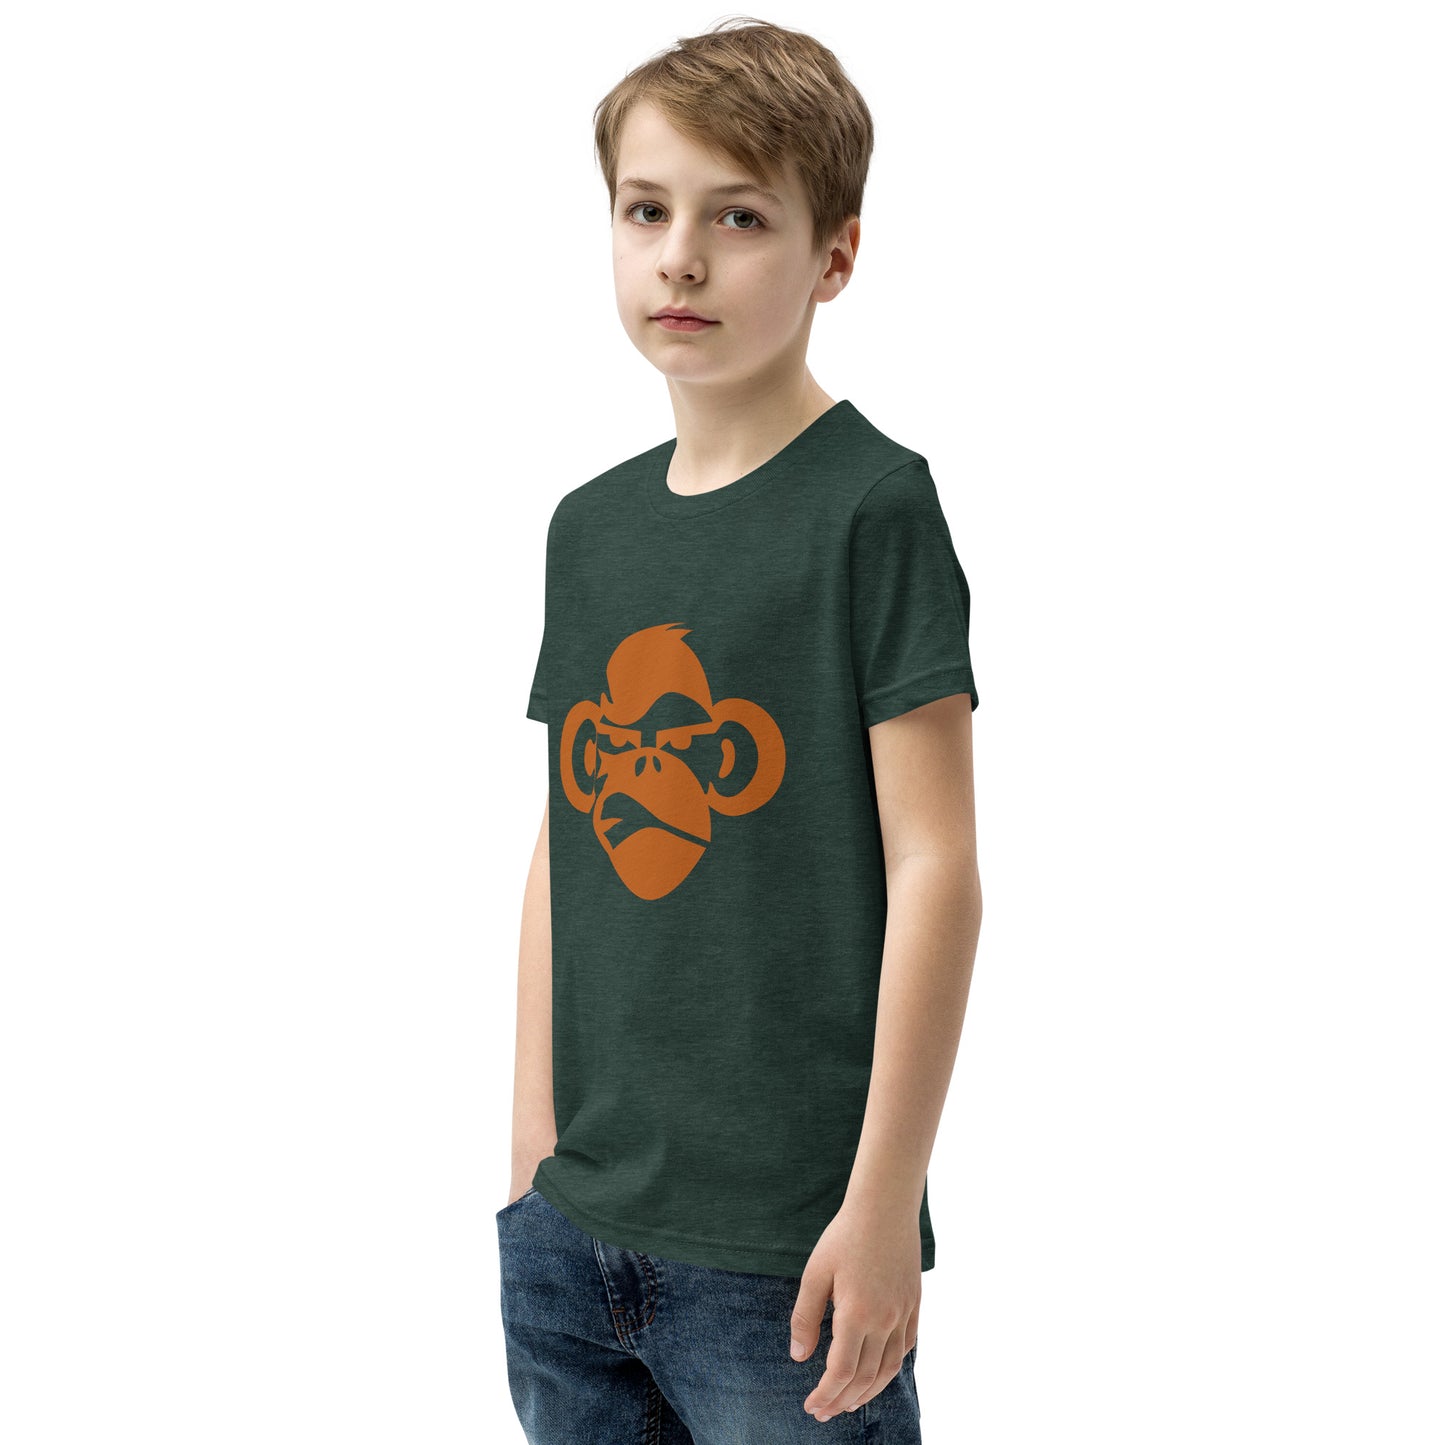 Youth with forest green T-shirt with a print of a head of a monkey in color brown